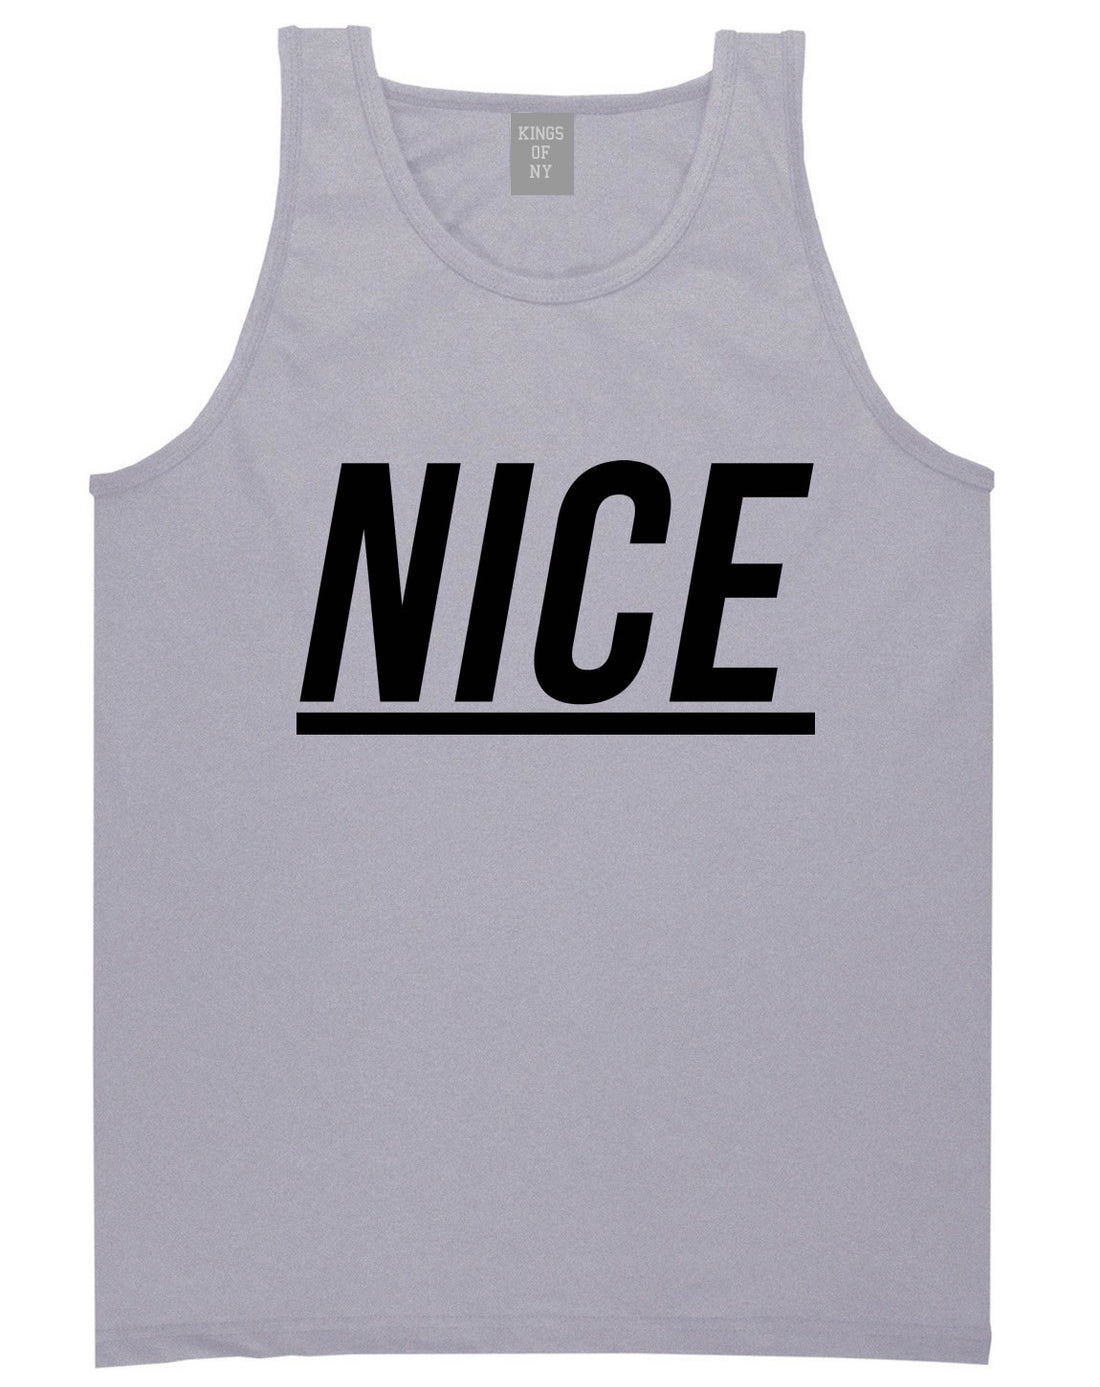 Nice Tank Top in Grey by Kings Of NY